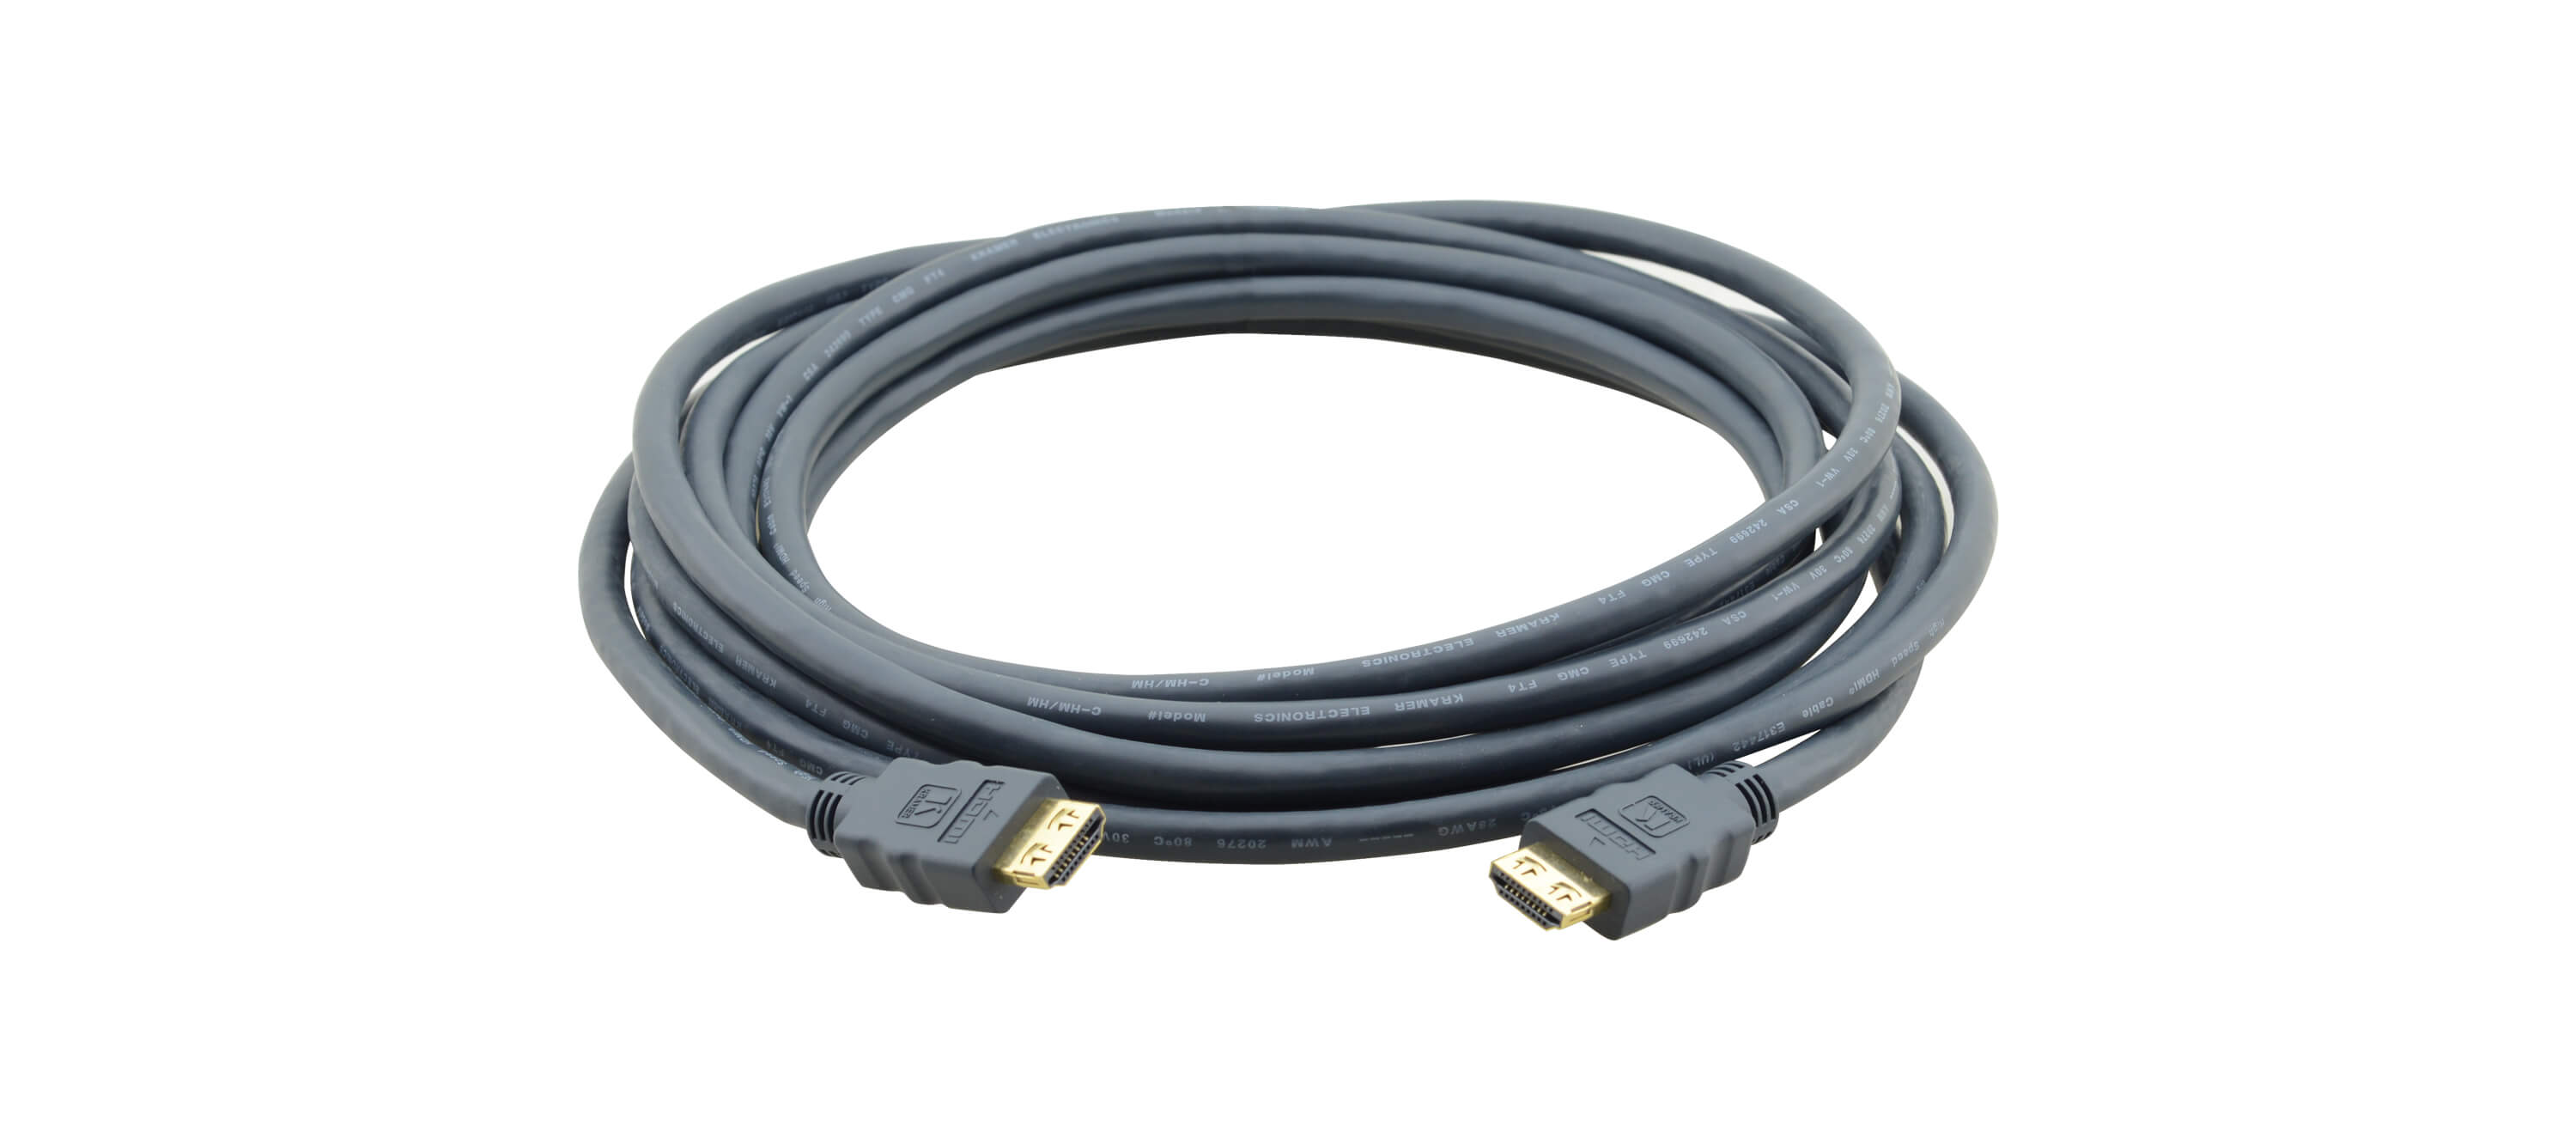 C-HM/HM/ETH-25 High–Speed HDMI Cable with Ethernet 25'